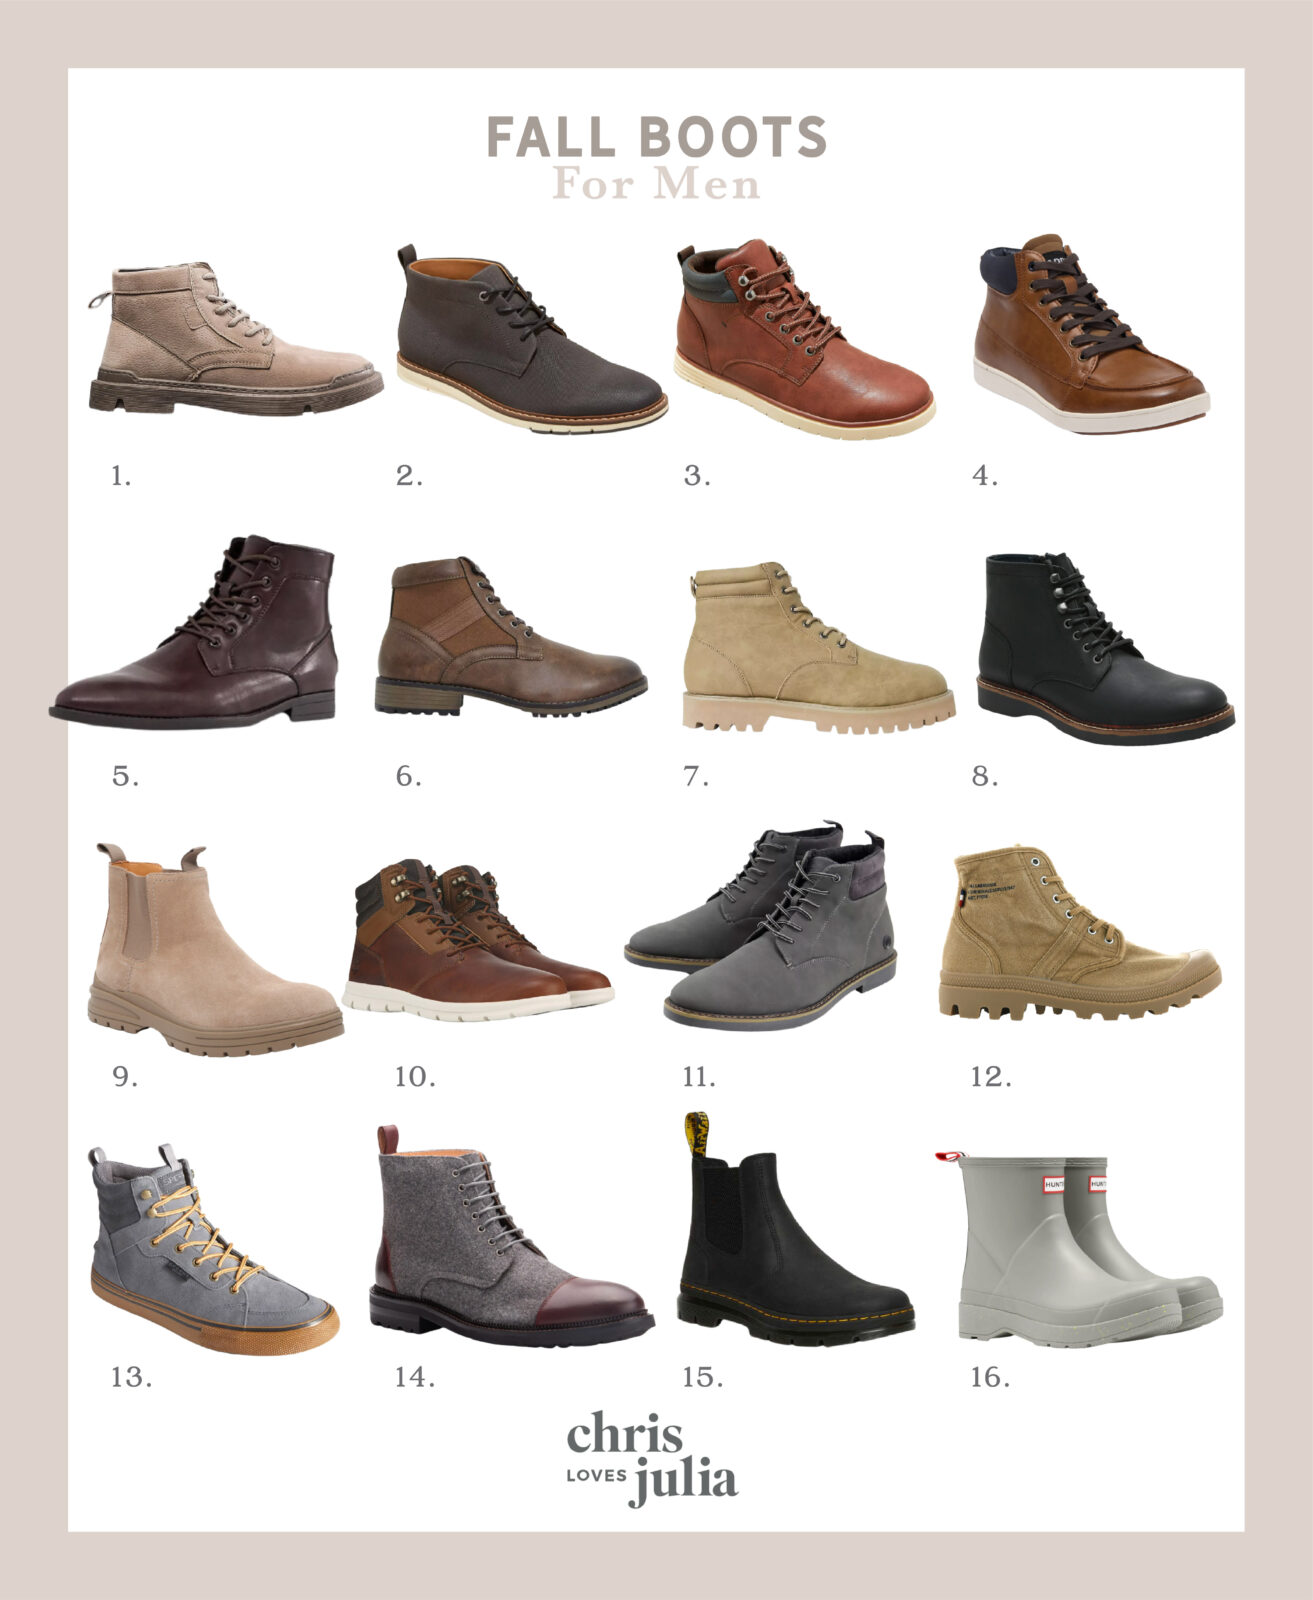 Casual Friday: Our Favorite Fall Boots - Chris Loves Julia